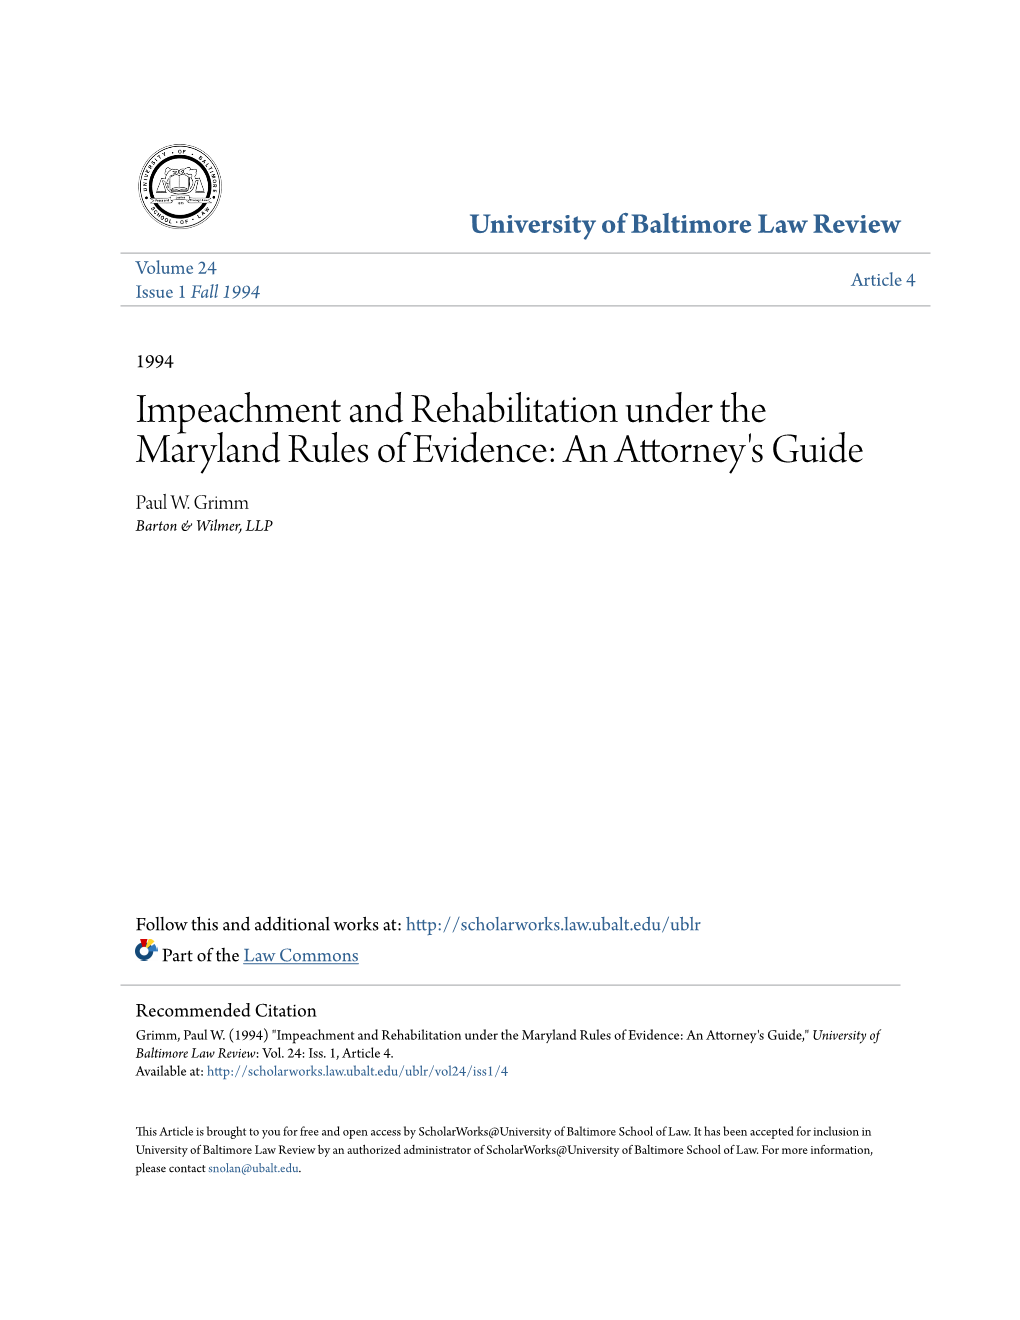 Impeachment and Rehabilitation Under the Maryland Rules of Evidence: an Attorney's Guide Paul W